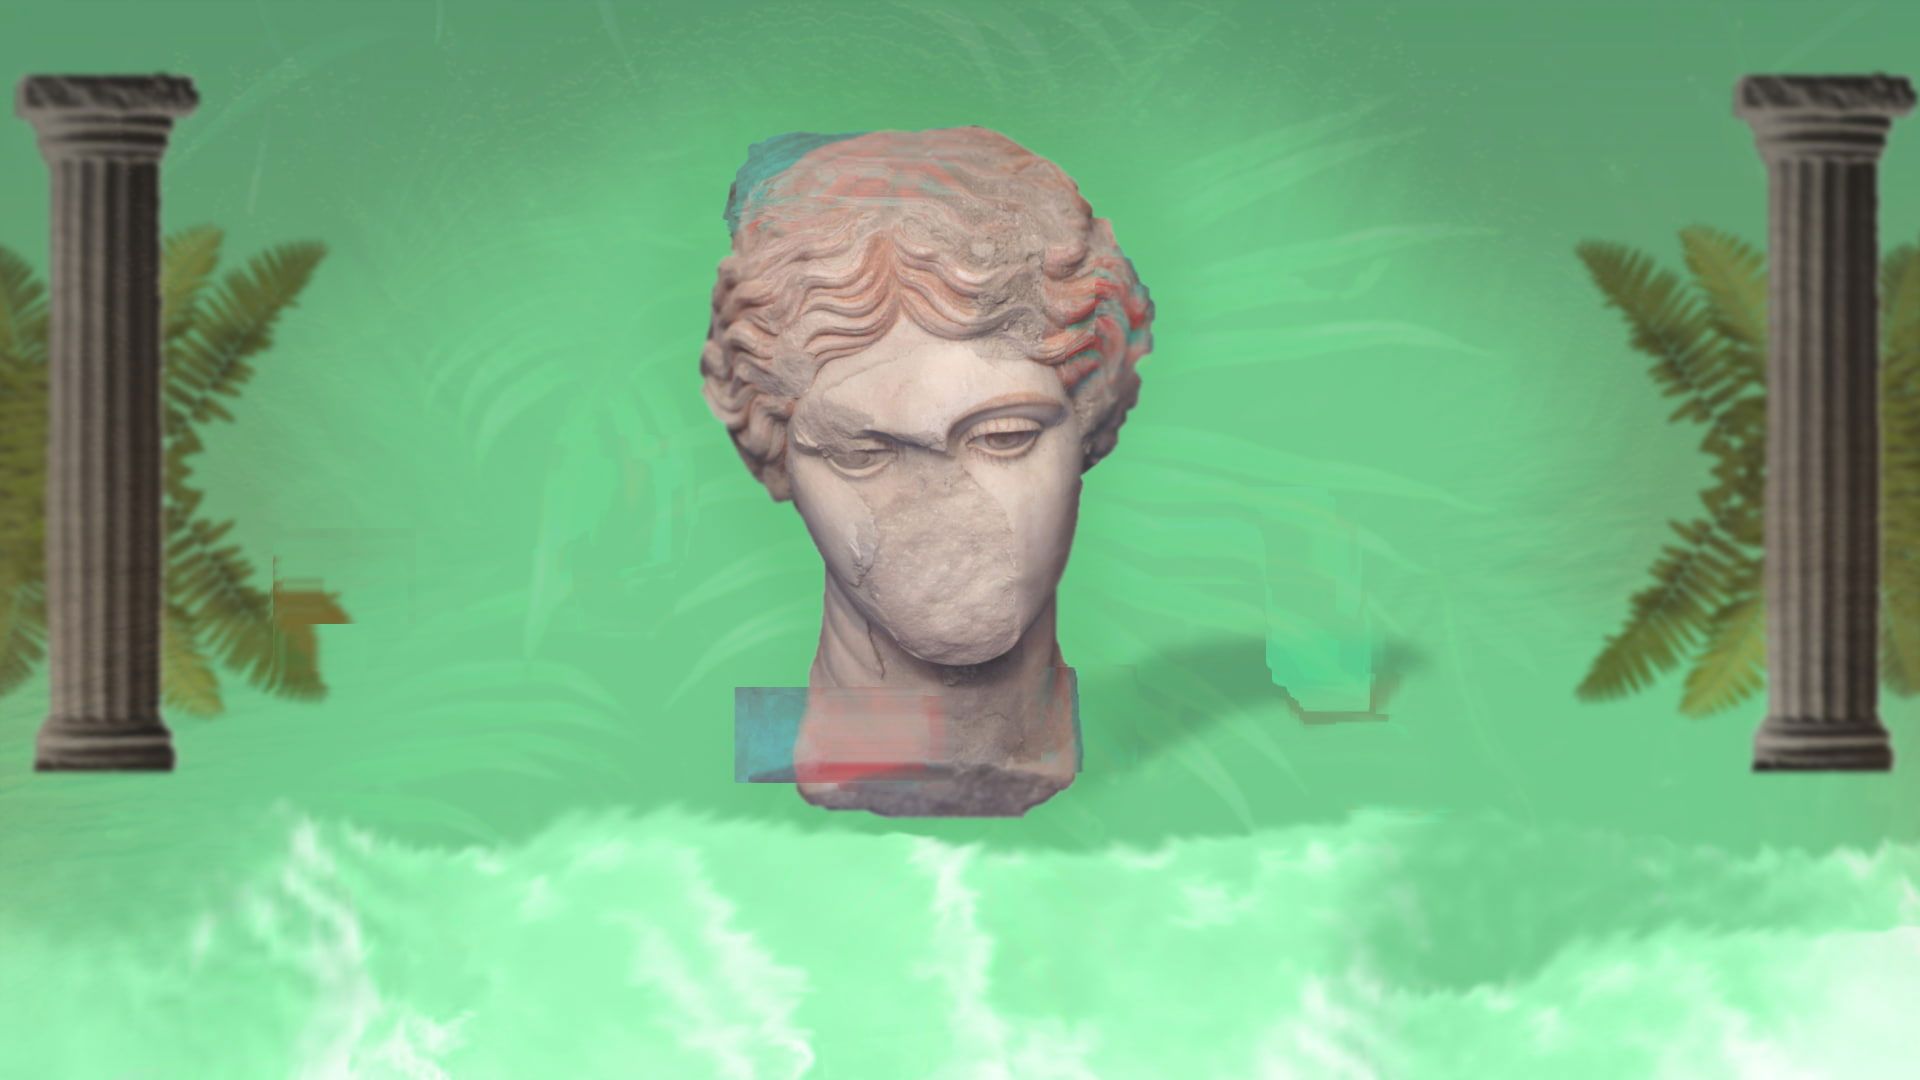 A bust of a man's head on a green background with clouds - Greek statue